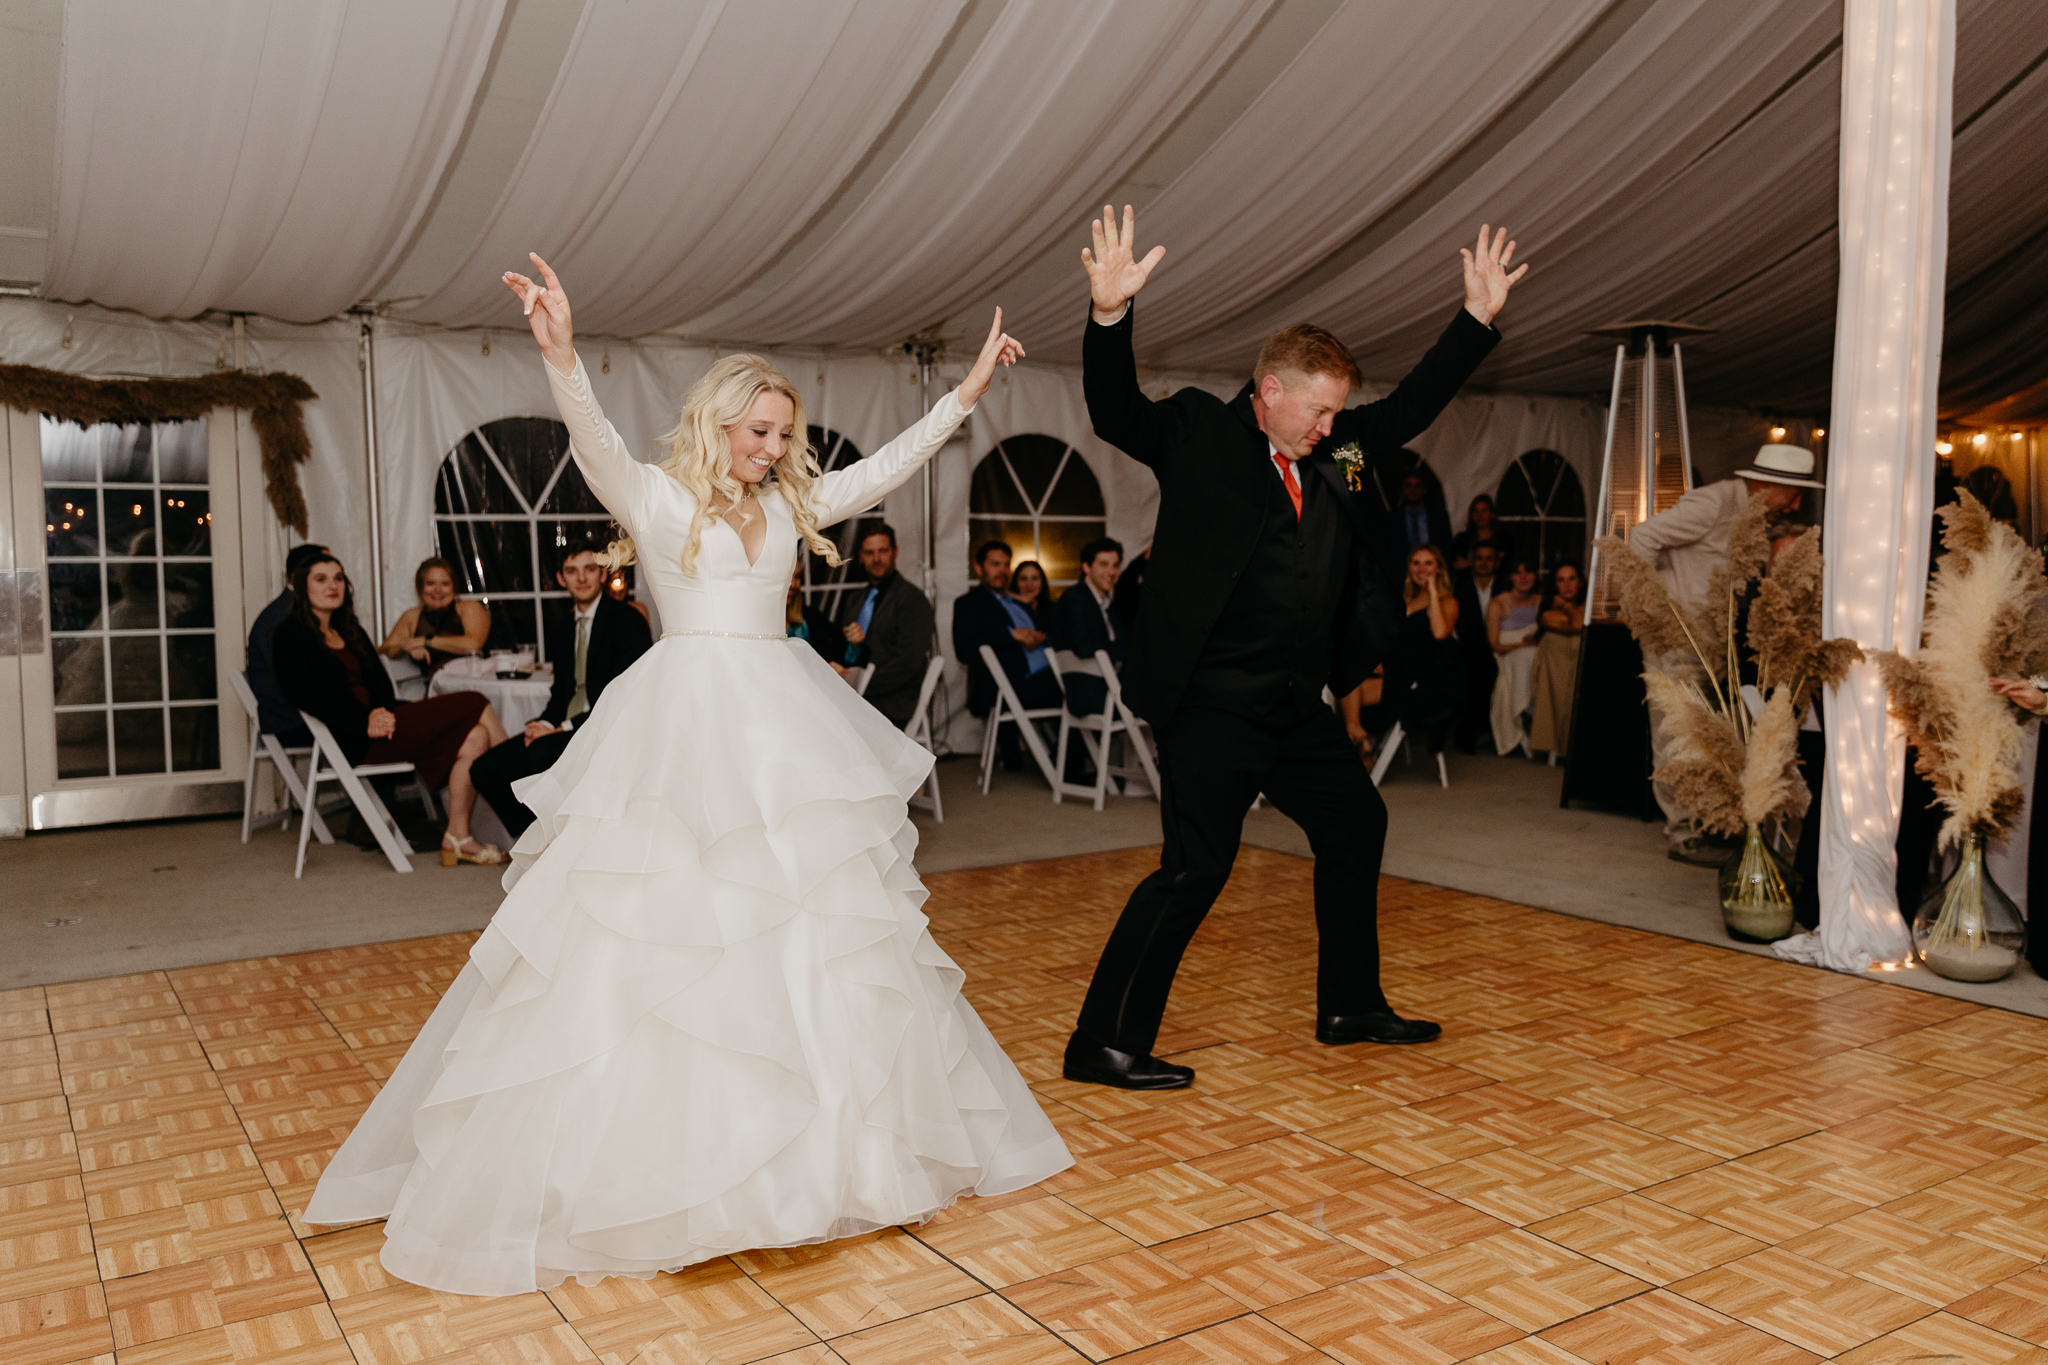 Bride and father dancing together during the father daughter dance, in a white tent wedding